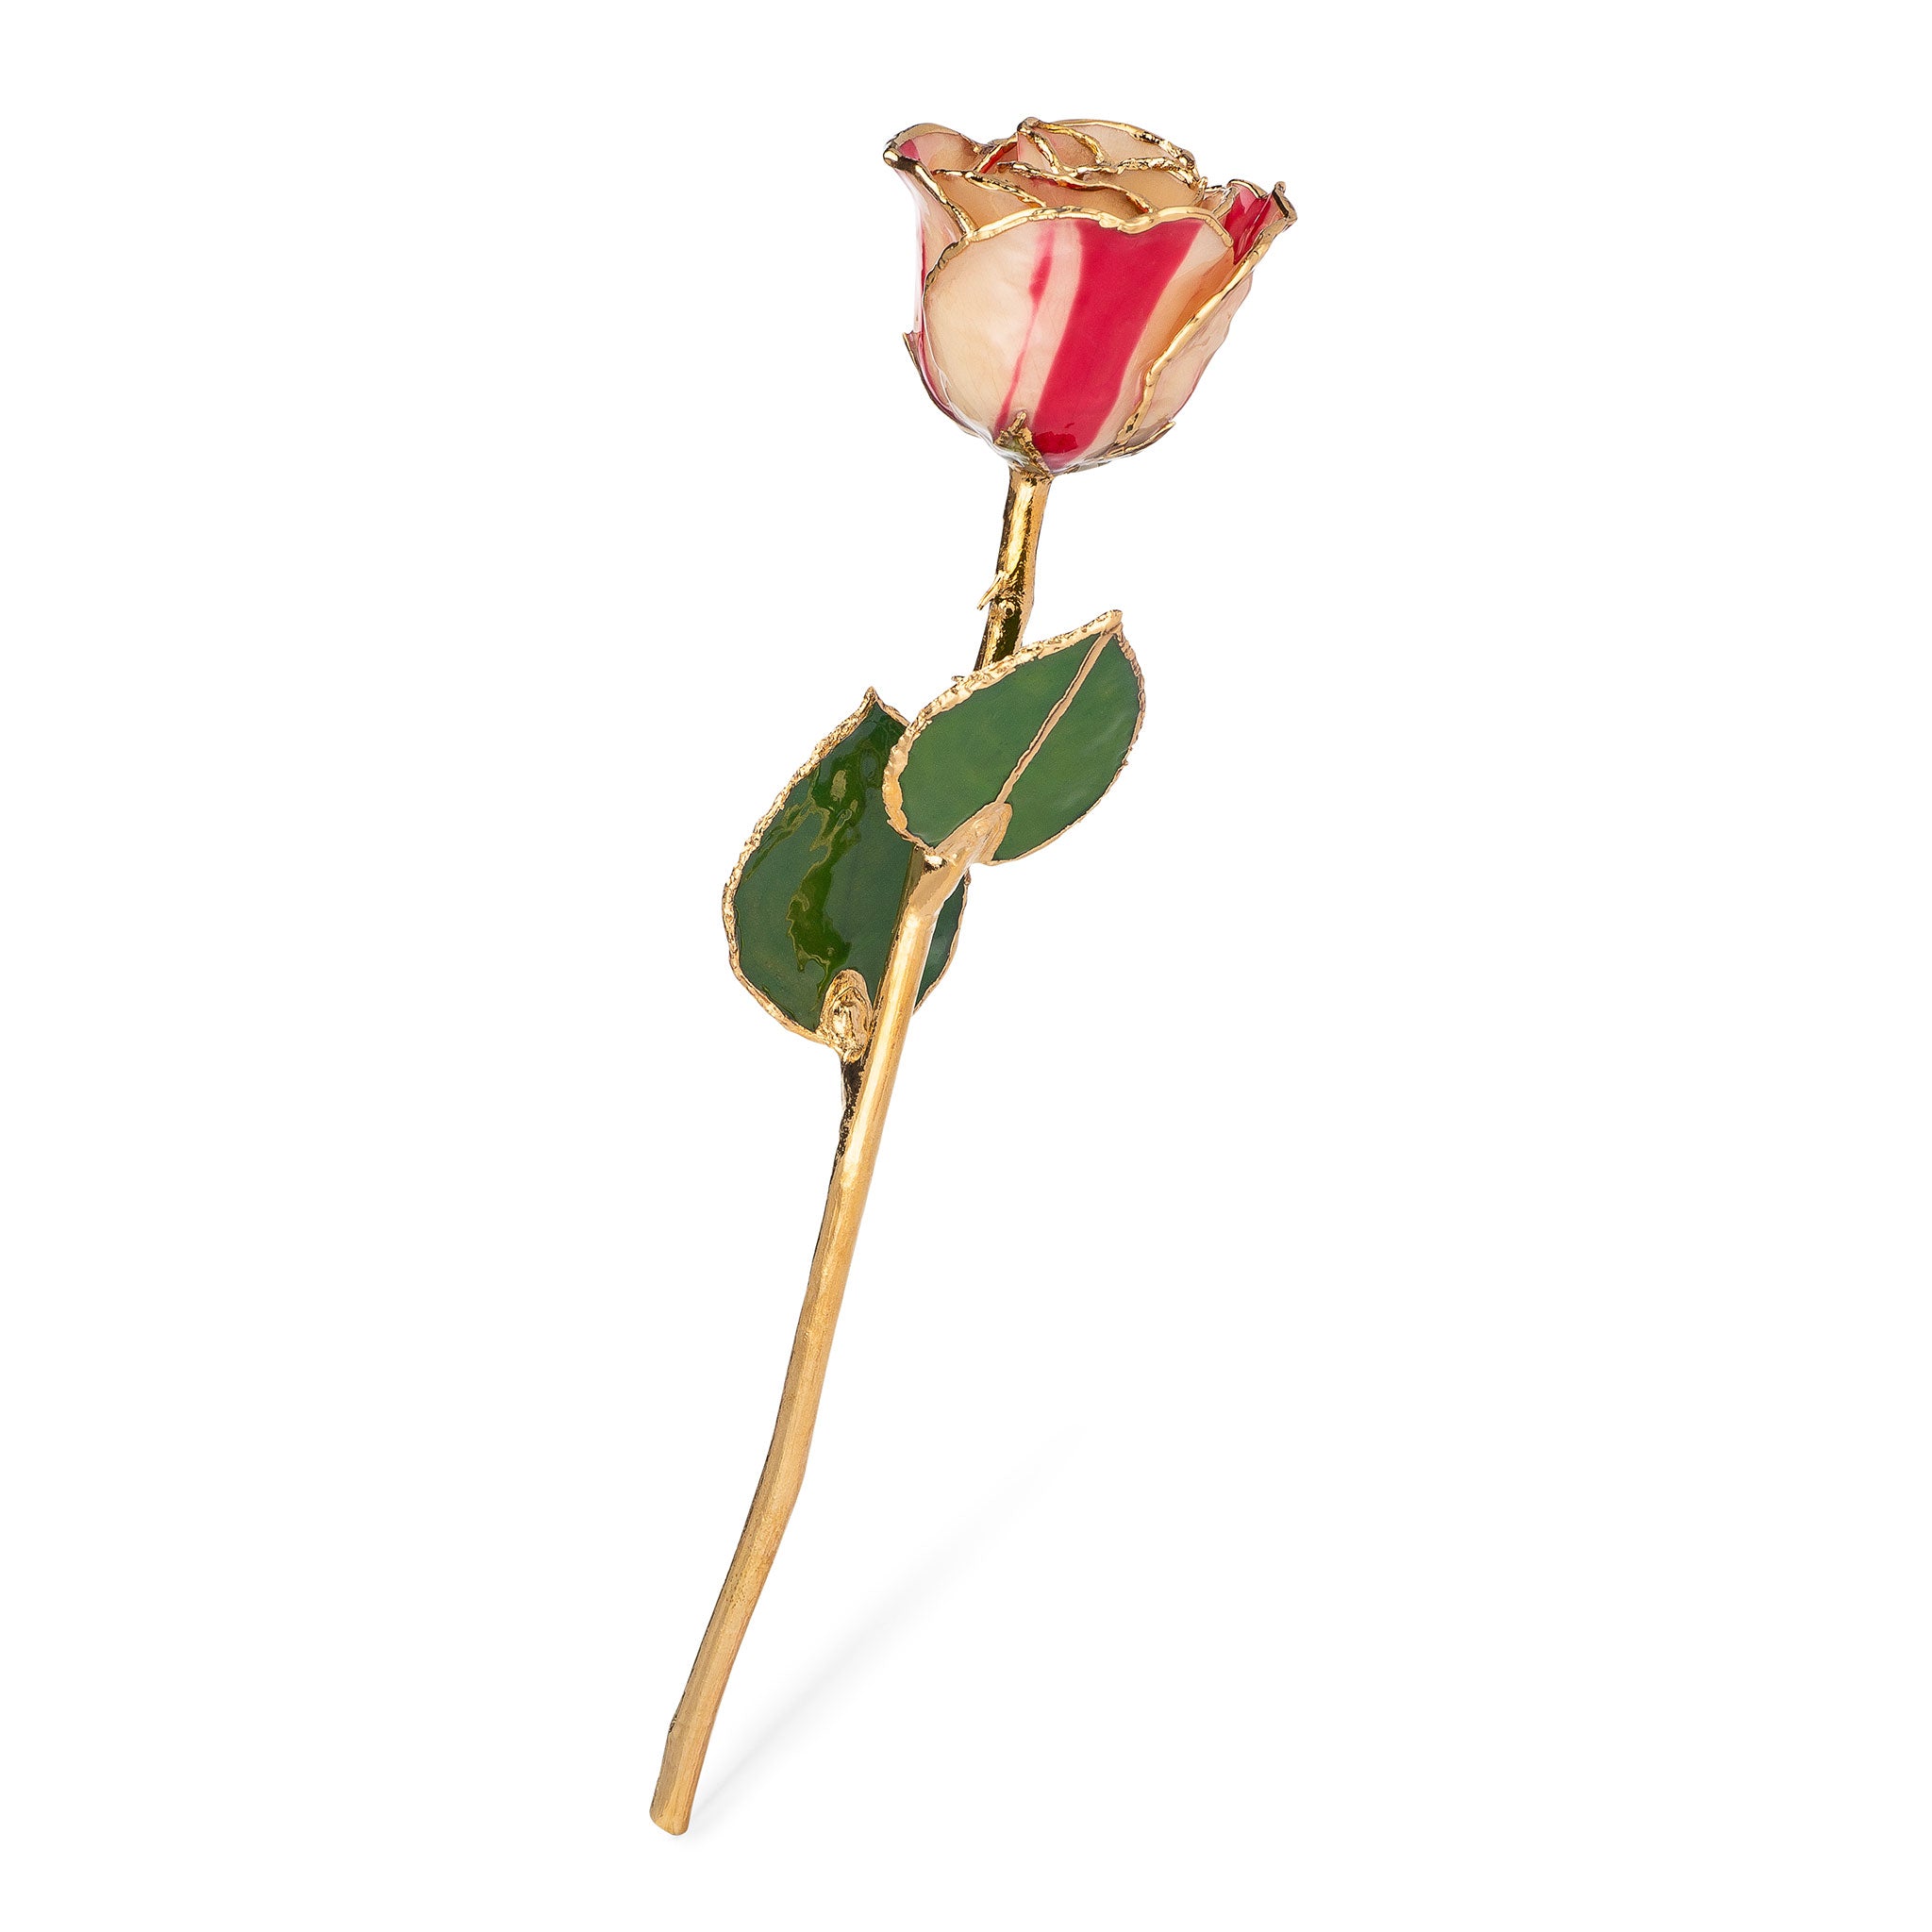 24K Gold Trimmed Forever Rose with Peppermint Striped Petals. View of Stem, Leaves, and Rose Petals and Showing Detail of Gold Trim